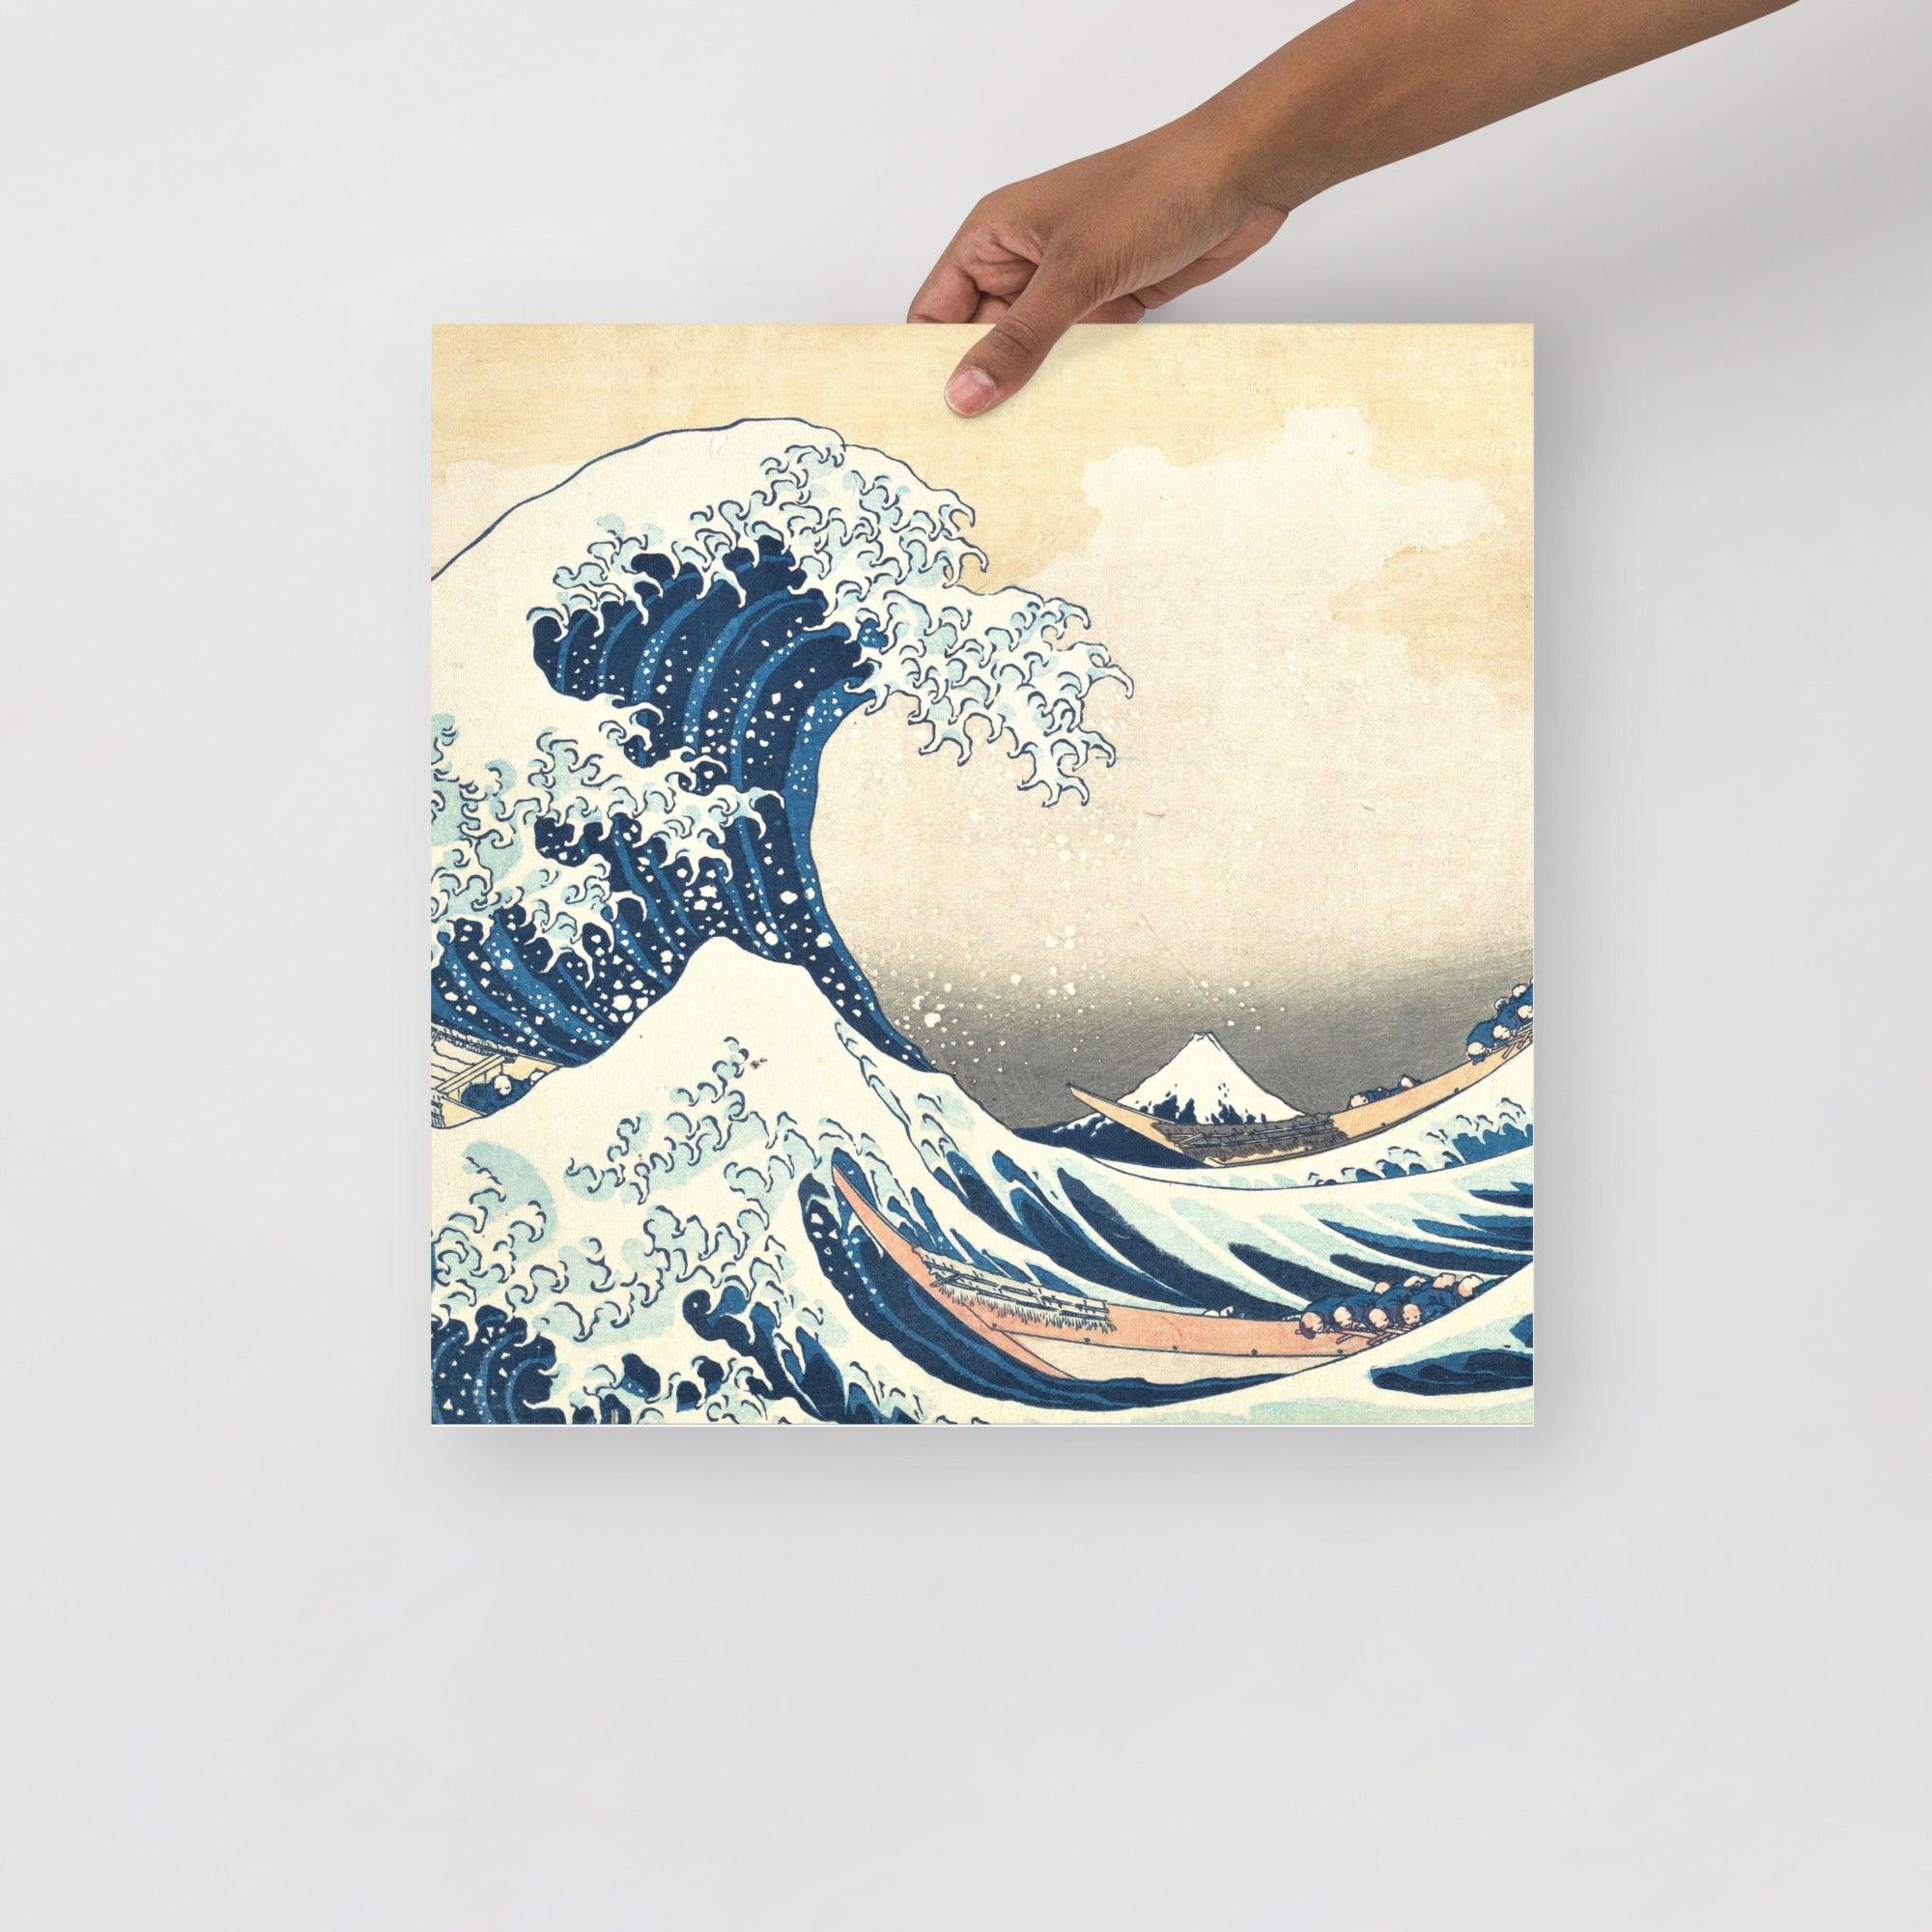 The Great Wave off Kanagawa by Hokusai poster on a plain backdrop in size 16x16”.